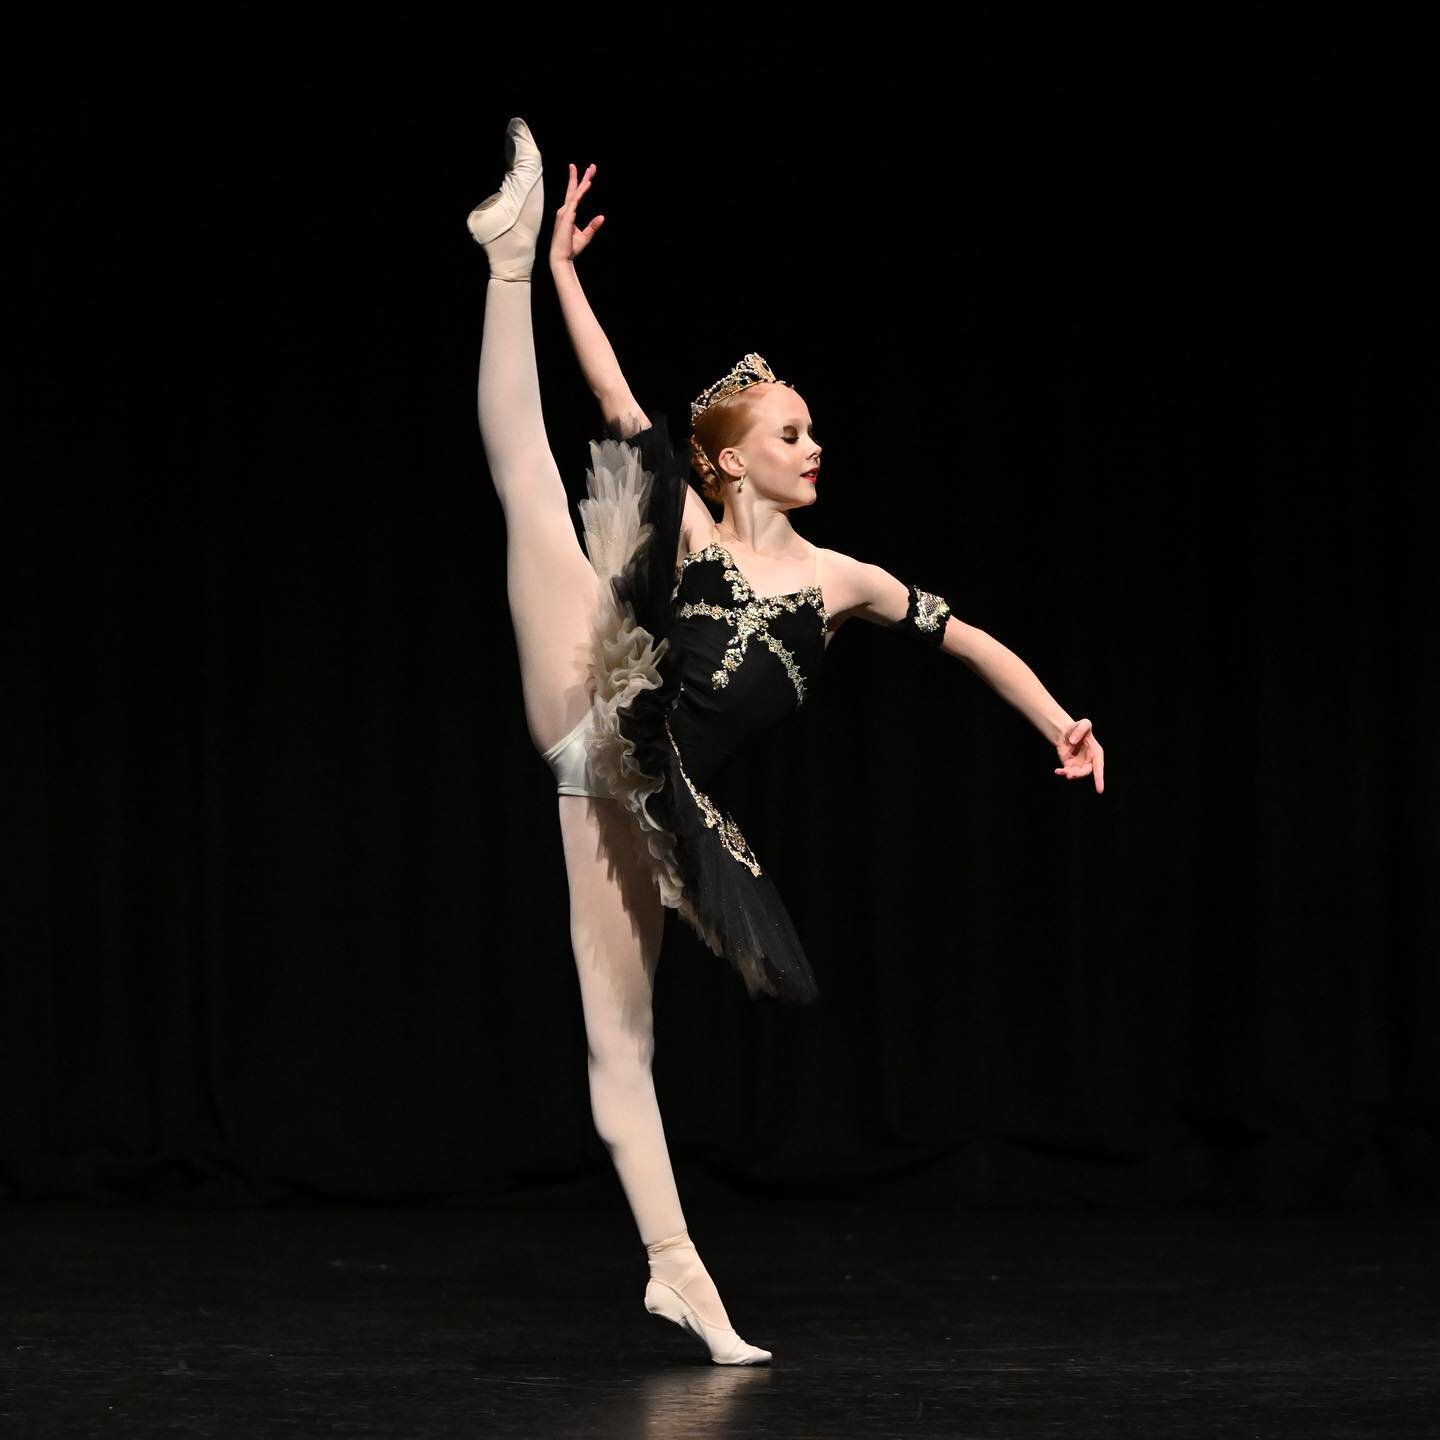 Well what can I say - @bonbonballerina has absolutely smashed it out of the park this week 😱⭐️

Receiving the following at @wollongongeisteddfod: 
🥇- 12 Open Classical 
🥇- 12 Open Jazz 
🥇- 12 Open Broadway 
🥇- 12 Open Lyrical 
🥇- 12 Open Contem